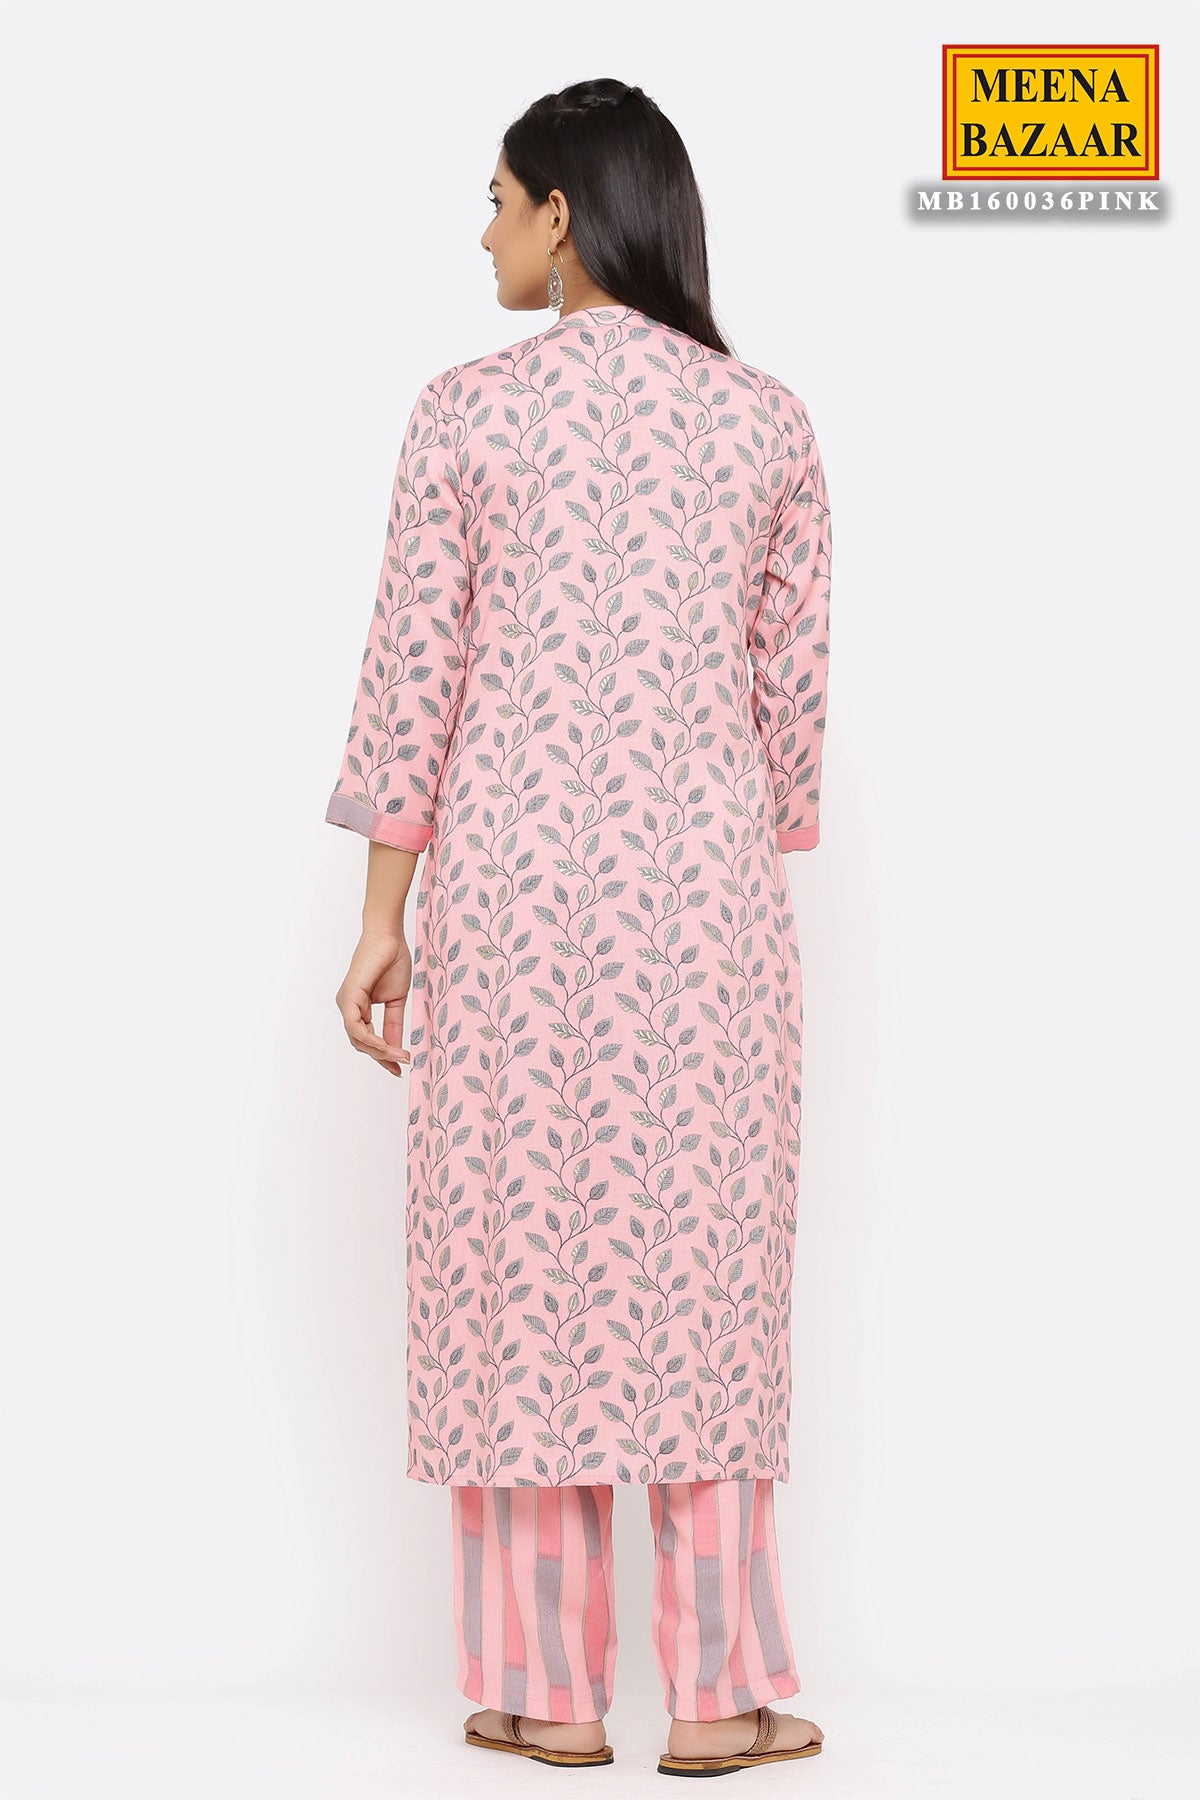 Pink Cotton Printed Kurti with Neck Embroidery